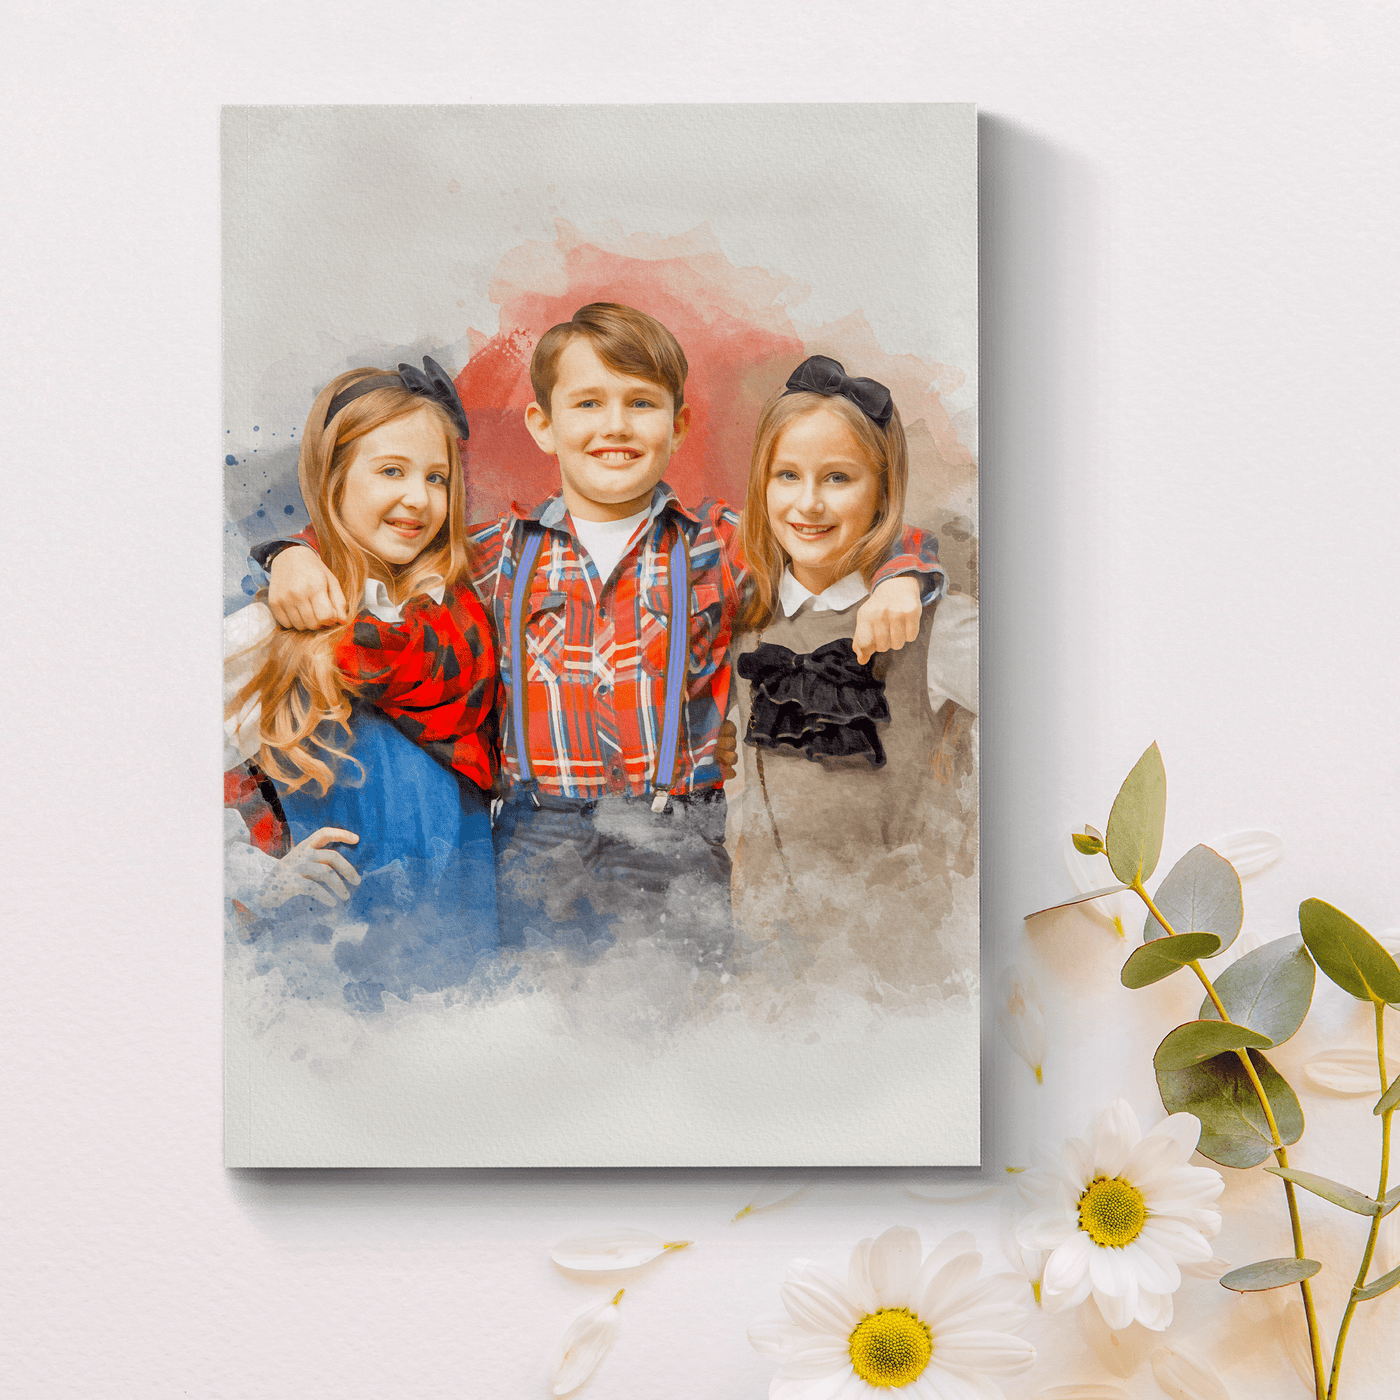 personal watercolor painting of a young boy and two girls